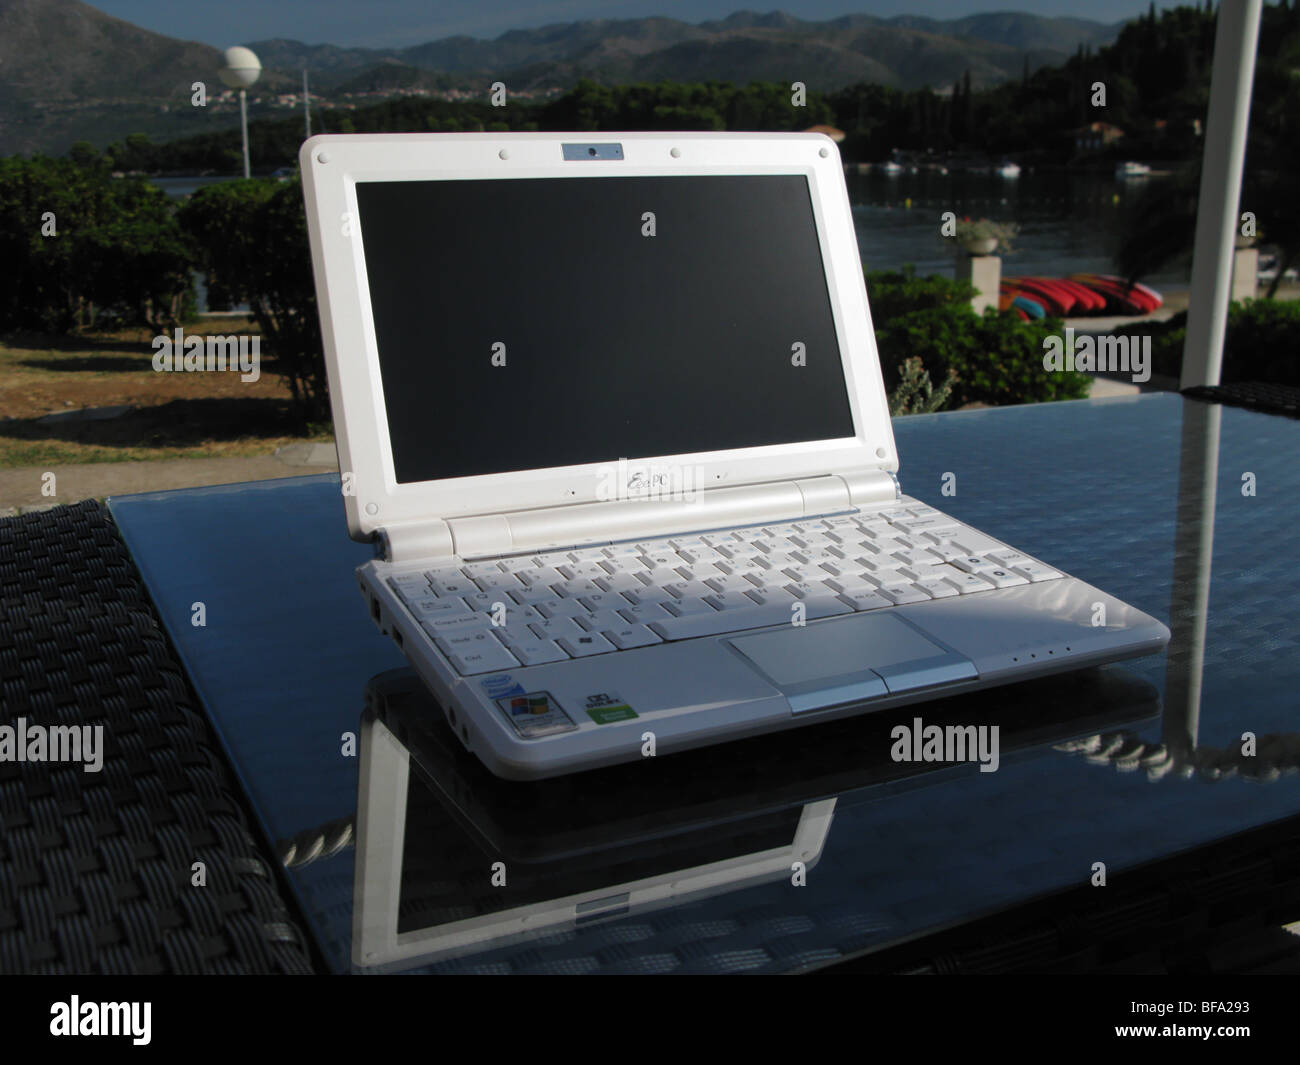 Asus Eee 1000 ten inch screen wifi netbook laptop personal pc computer on a table outside a hotel overlooking the mediterranean Stock Photo